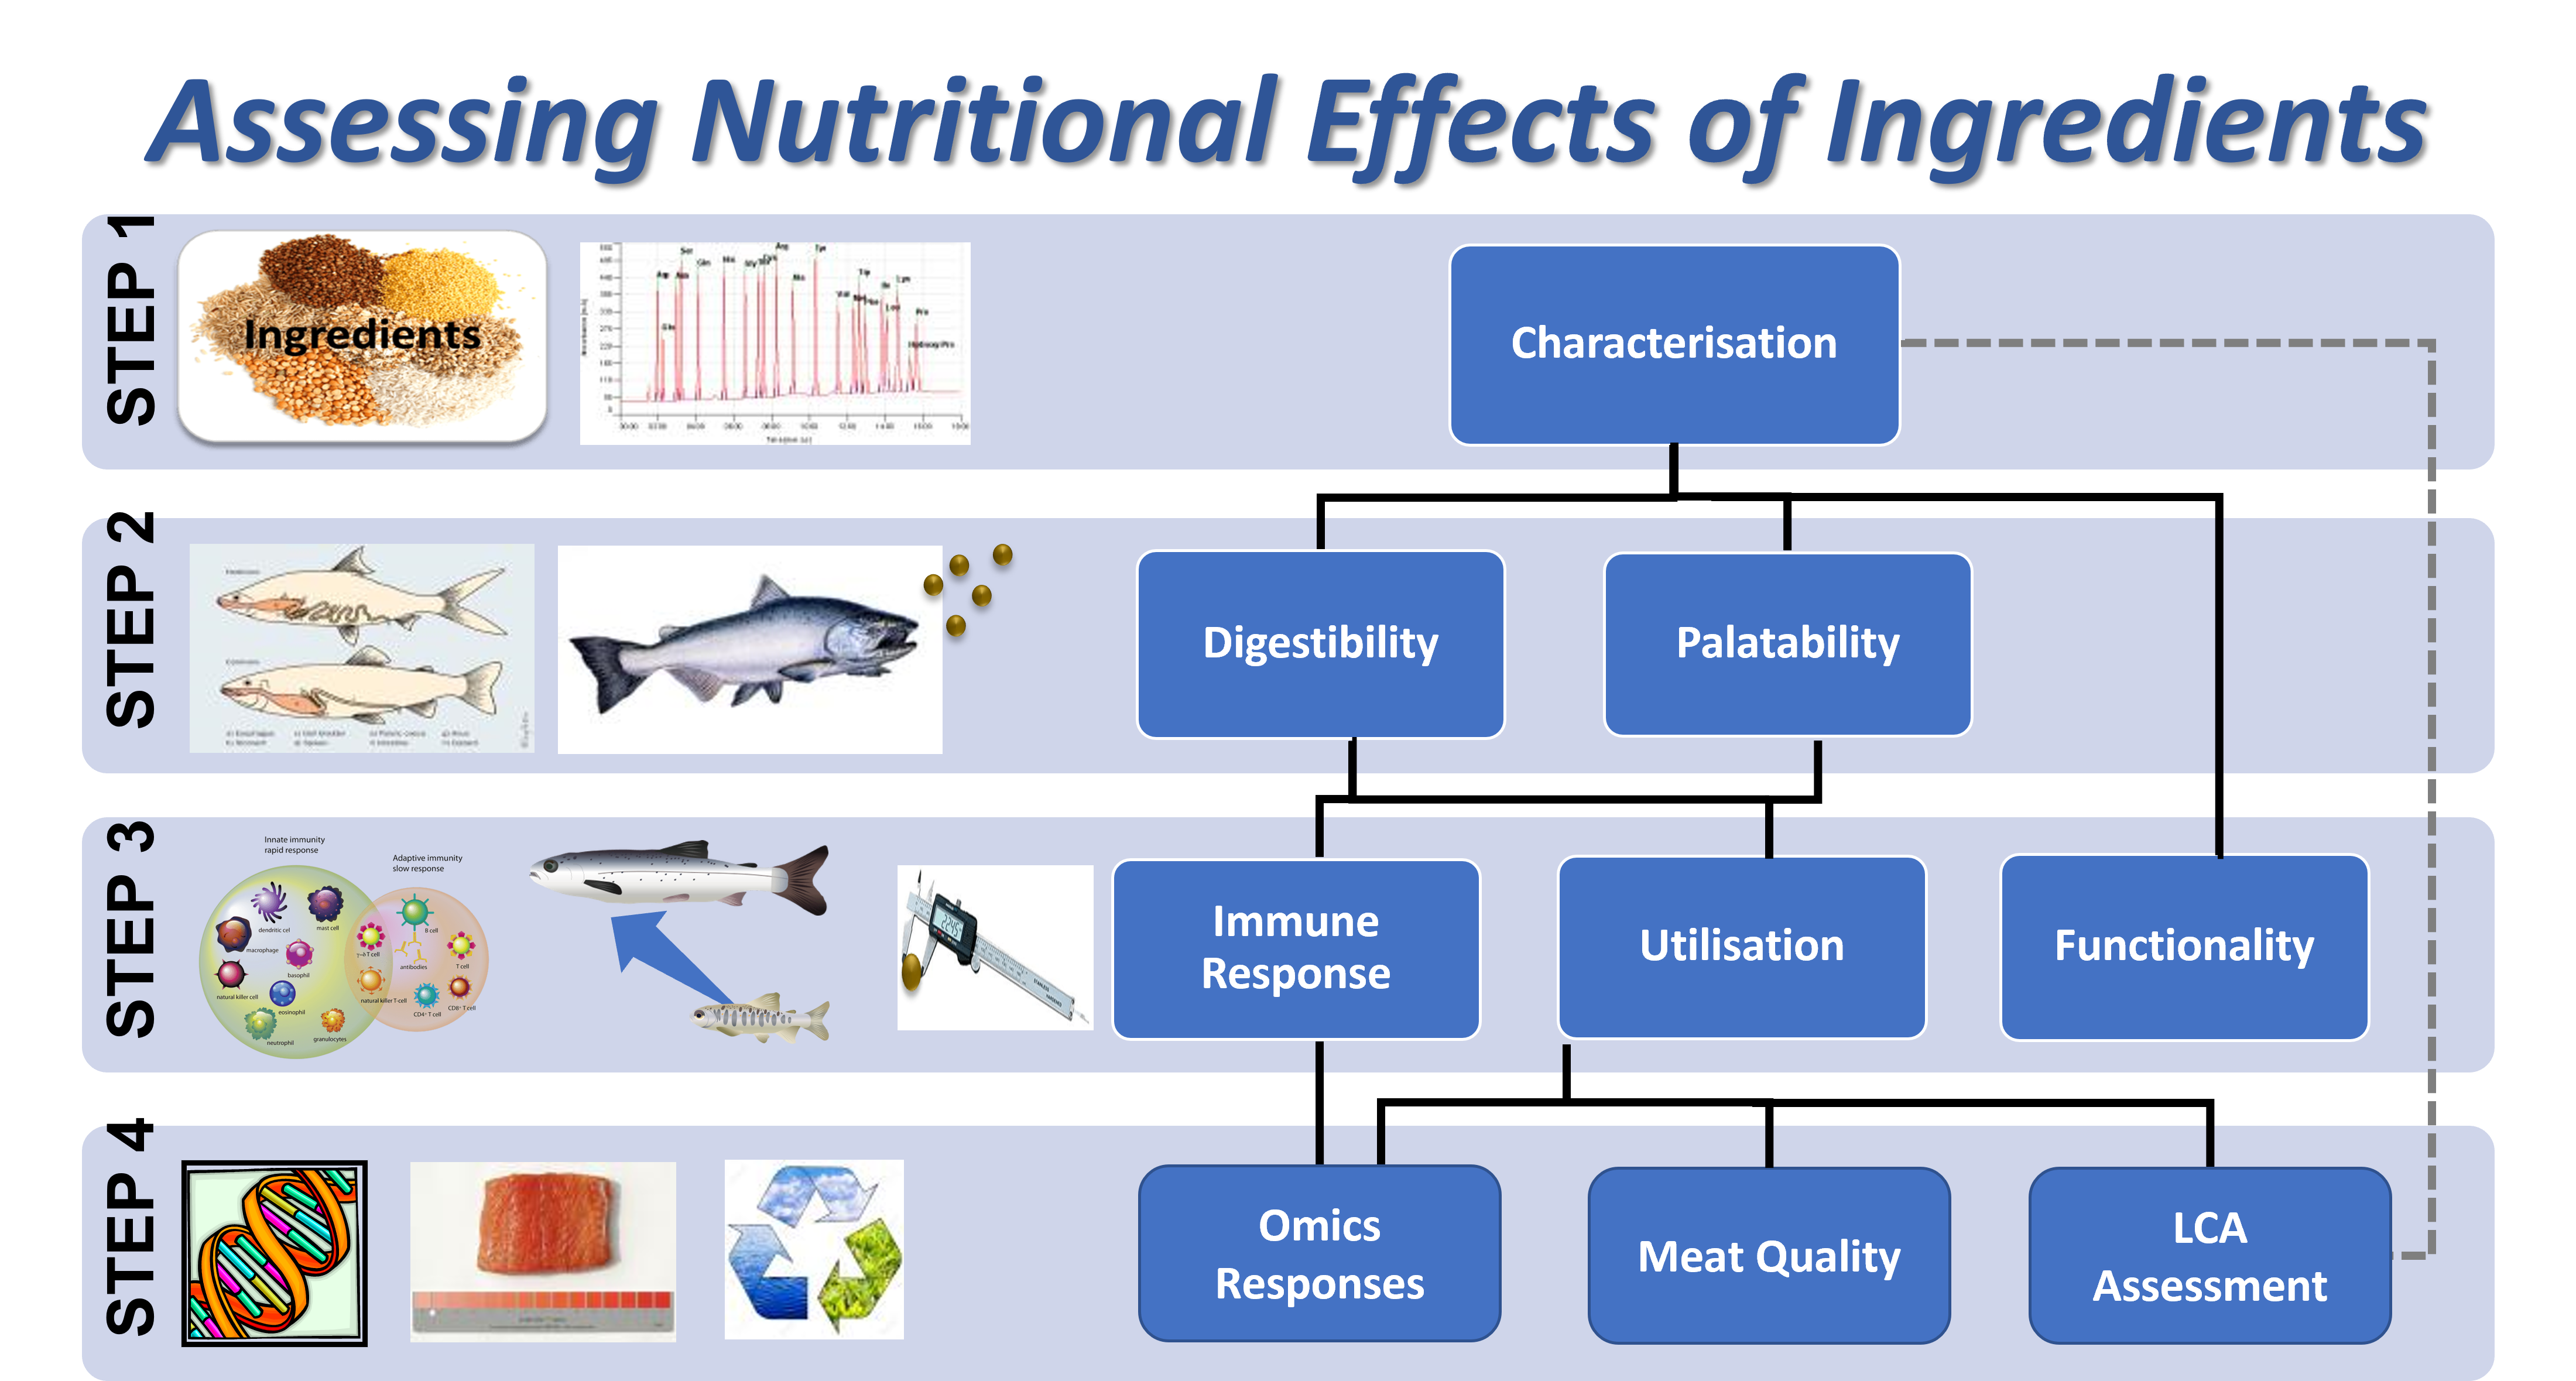 Assessing nutritional effects of ingredients